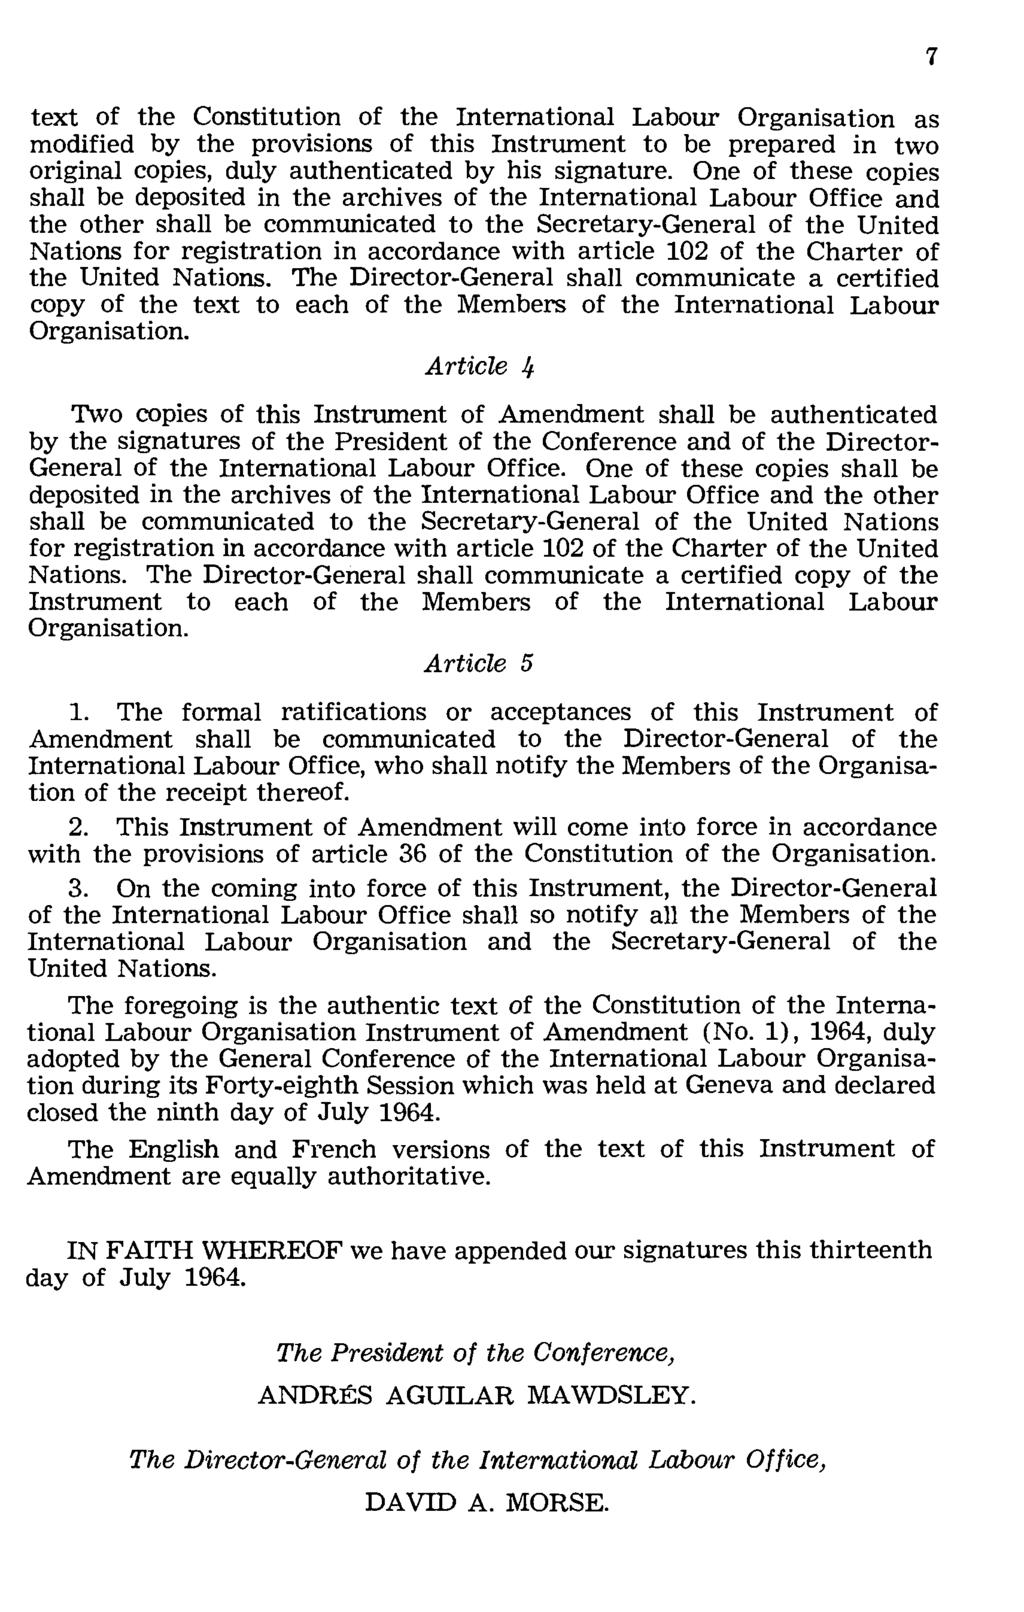 text of the Constitution of the International Labour Organisation as modified by the provisions of this Instrument to be prepared in two original copies, duly authenticated by his signature.